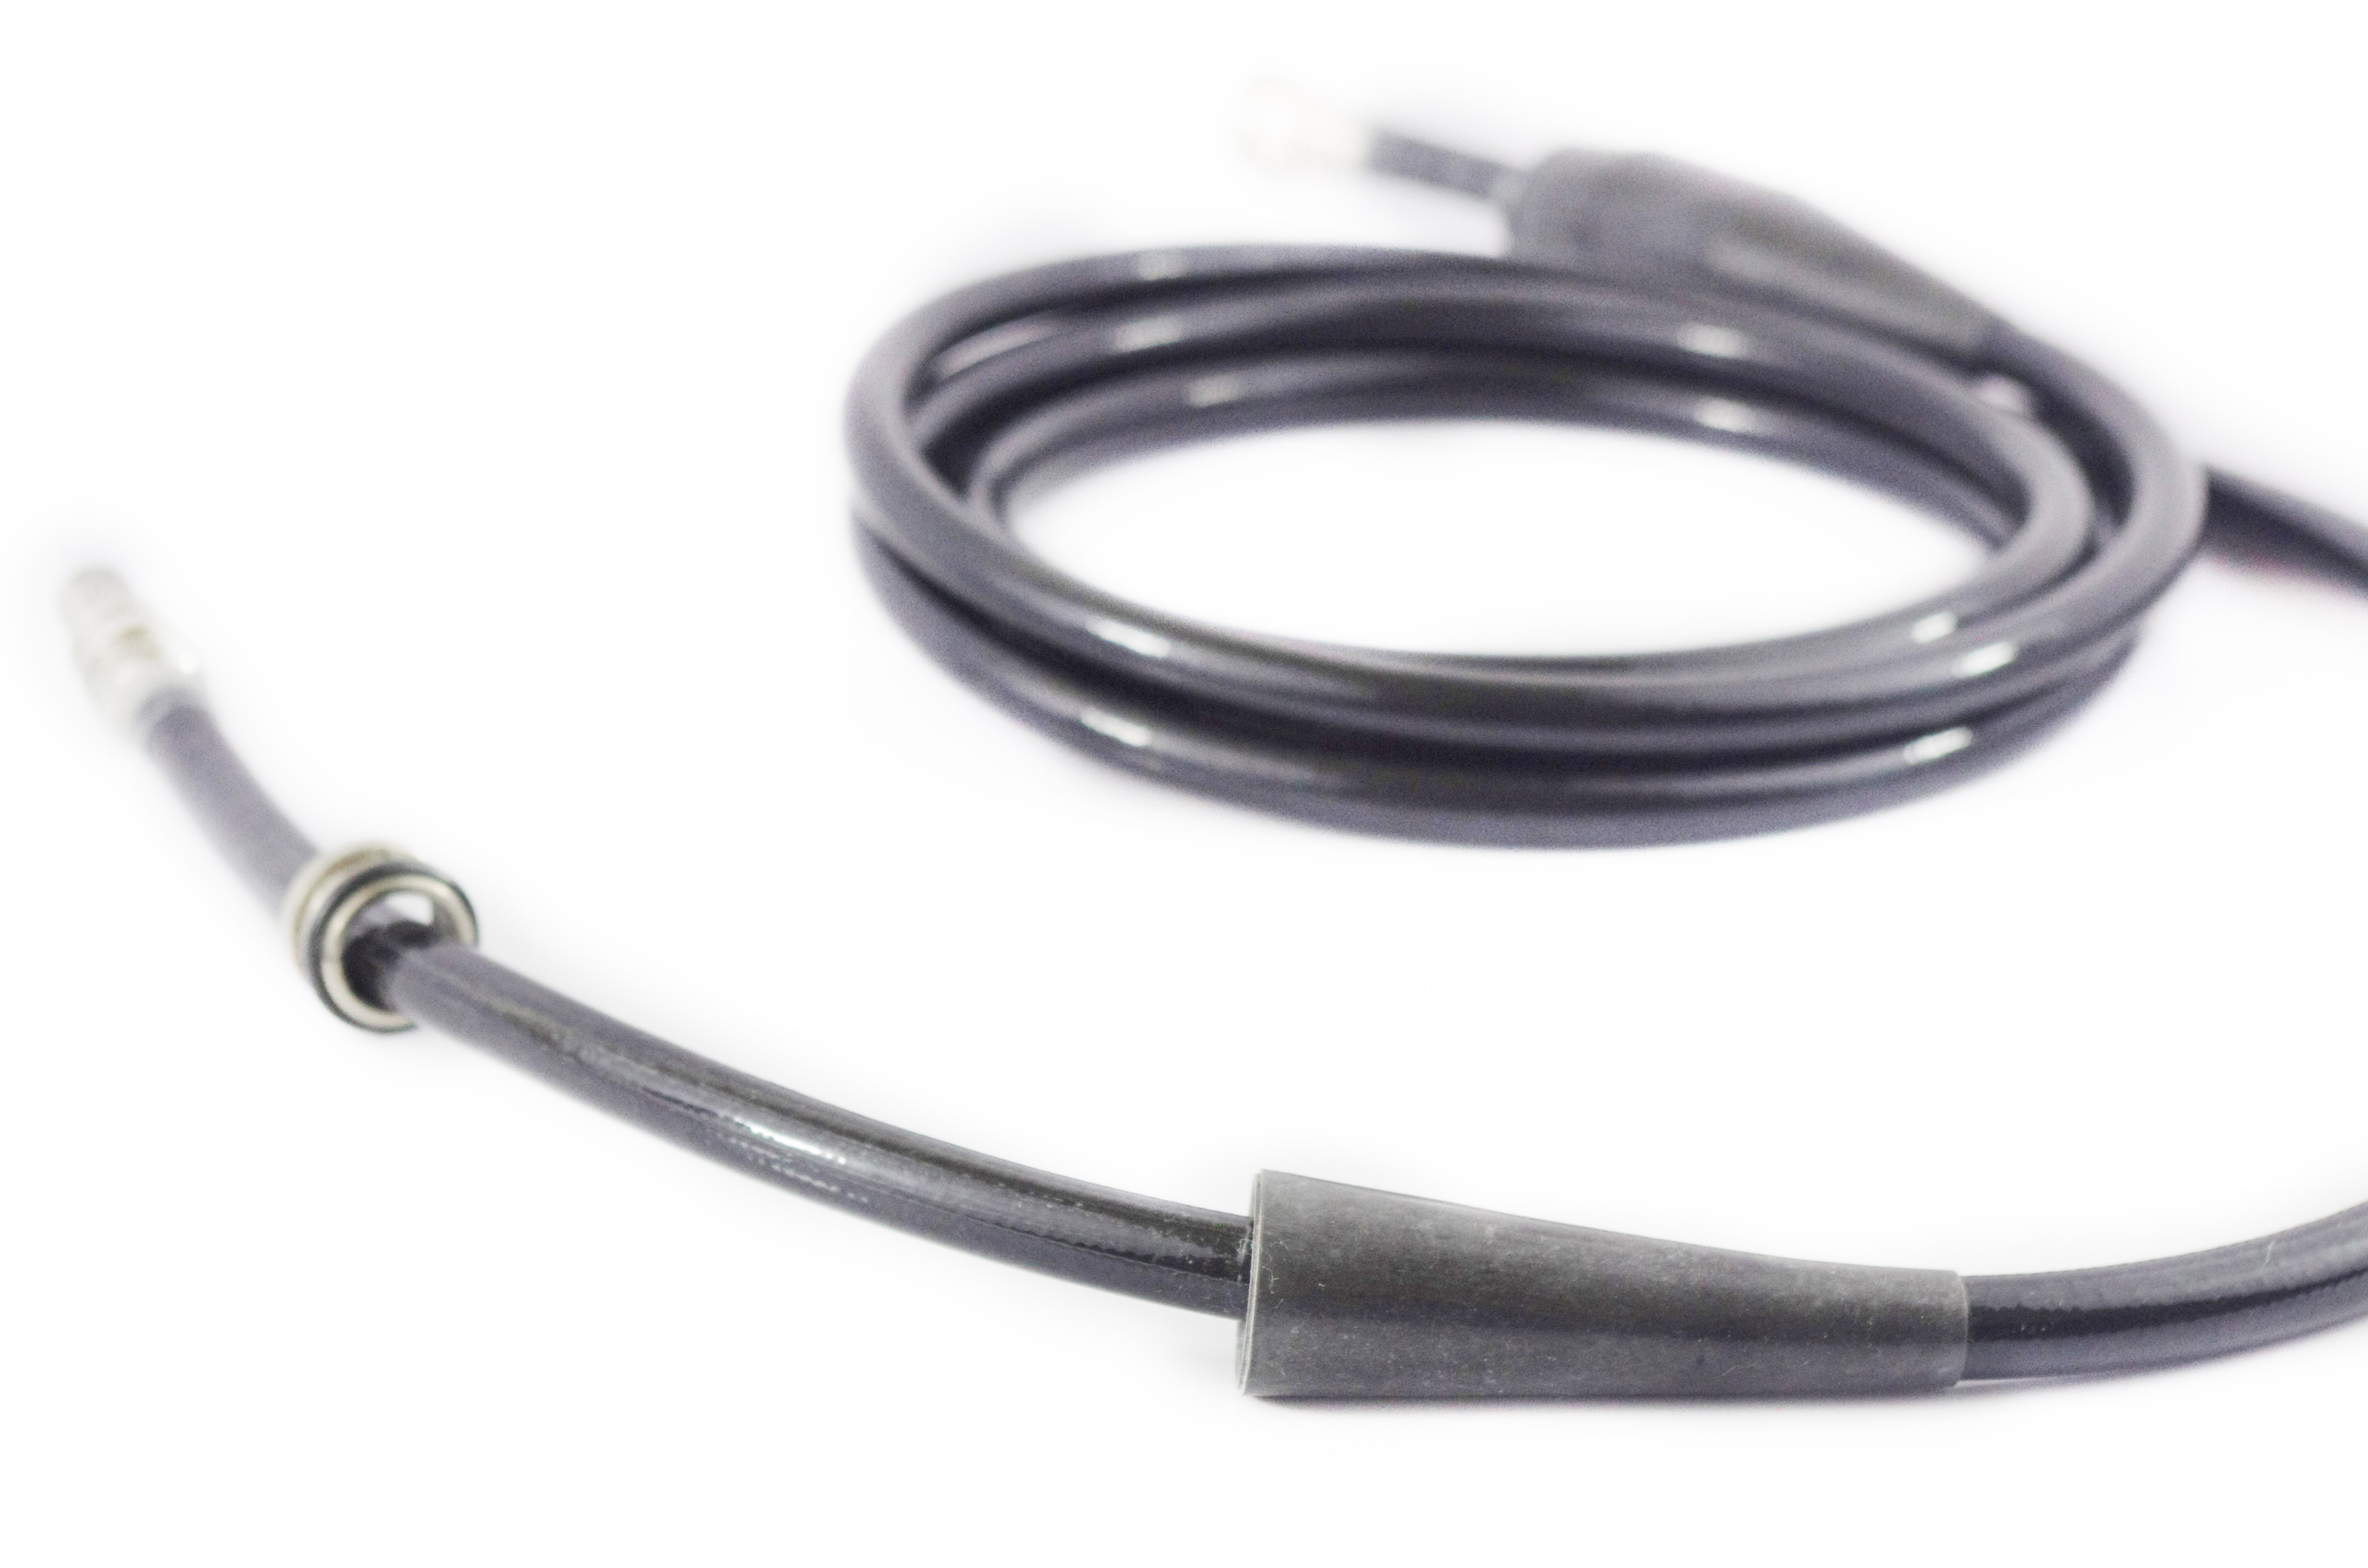 OEM Cable: Ultrasonic with Boots - GF-UM130, GF-UMQ130